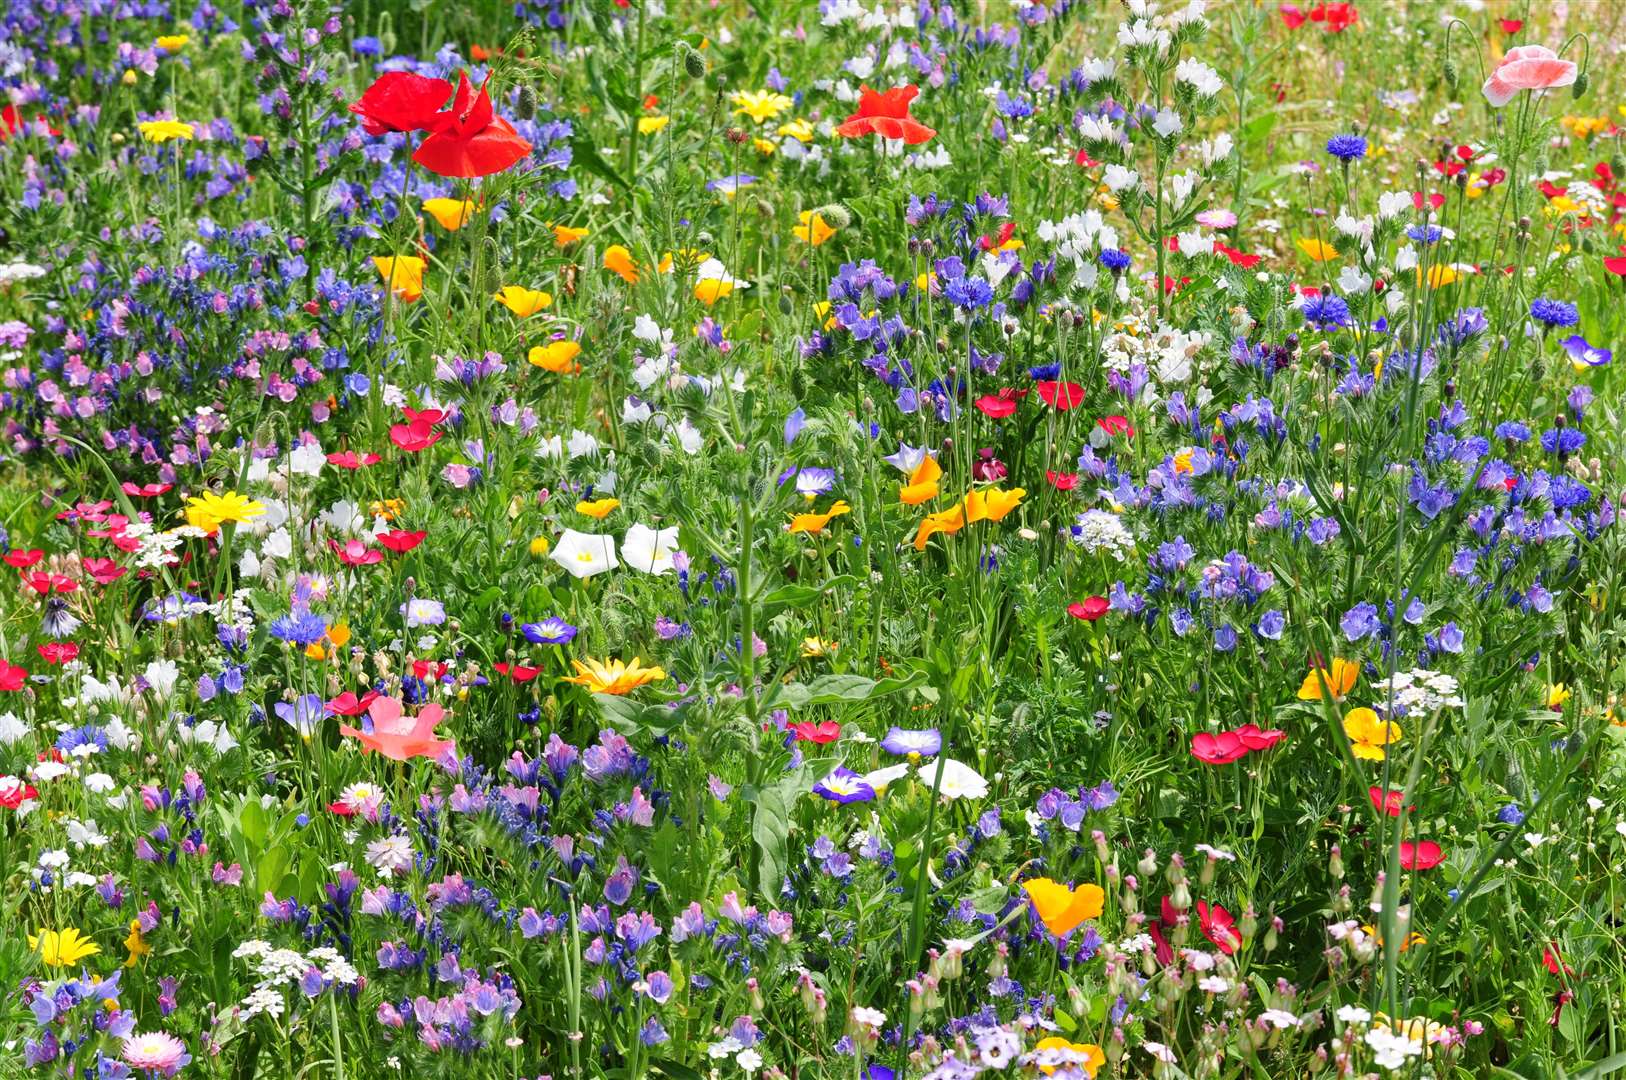 Colourful cornflower, poppy and other beautiful wildflowers in a summer meadow.